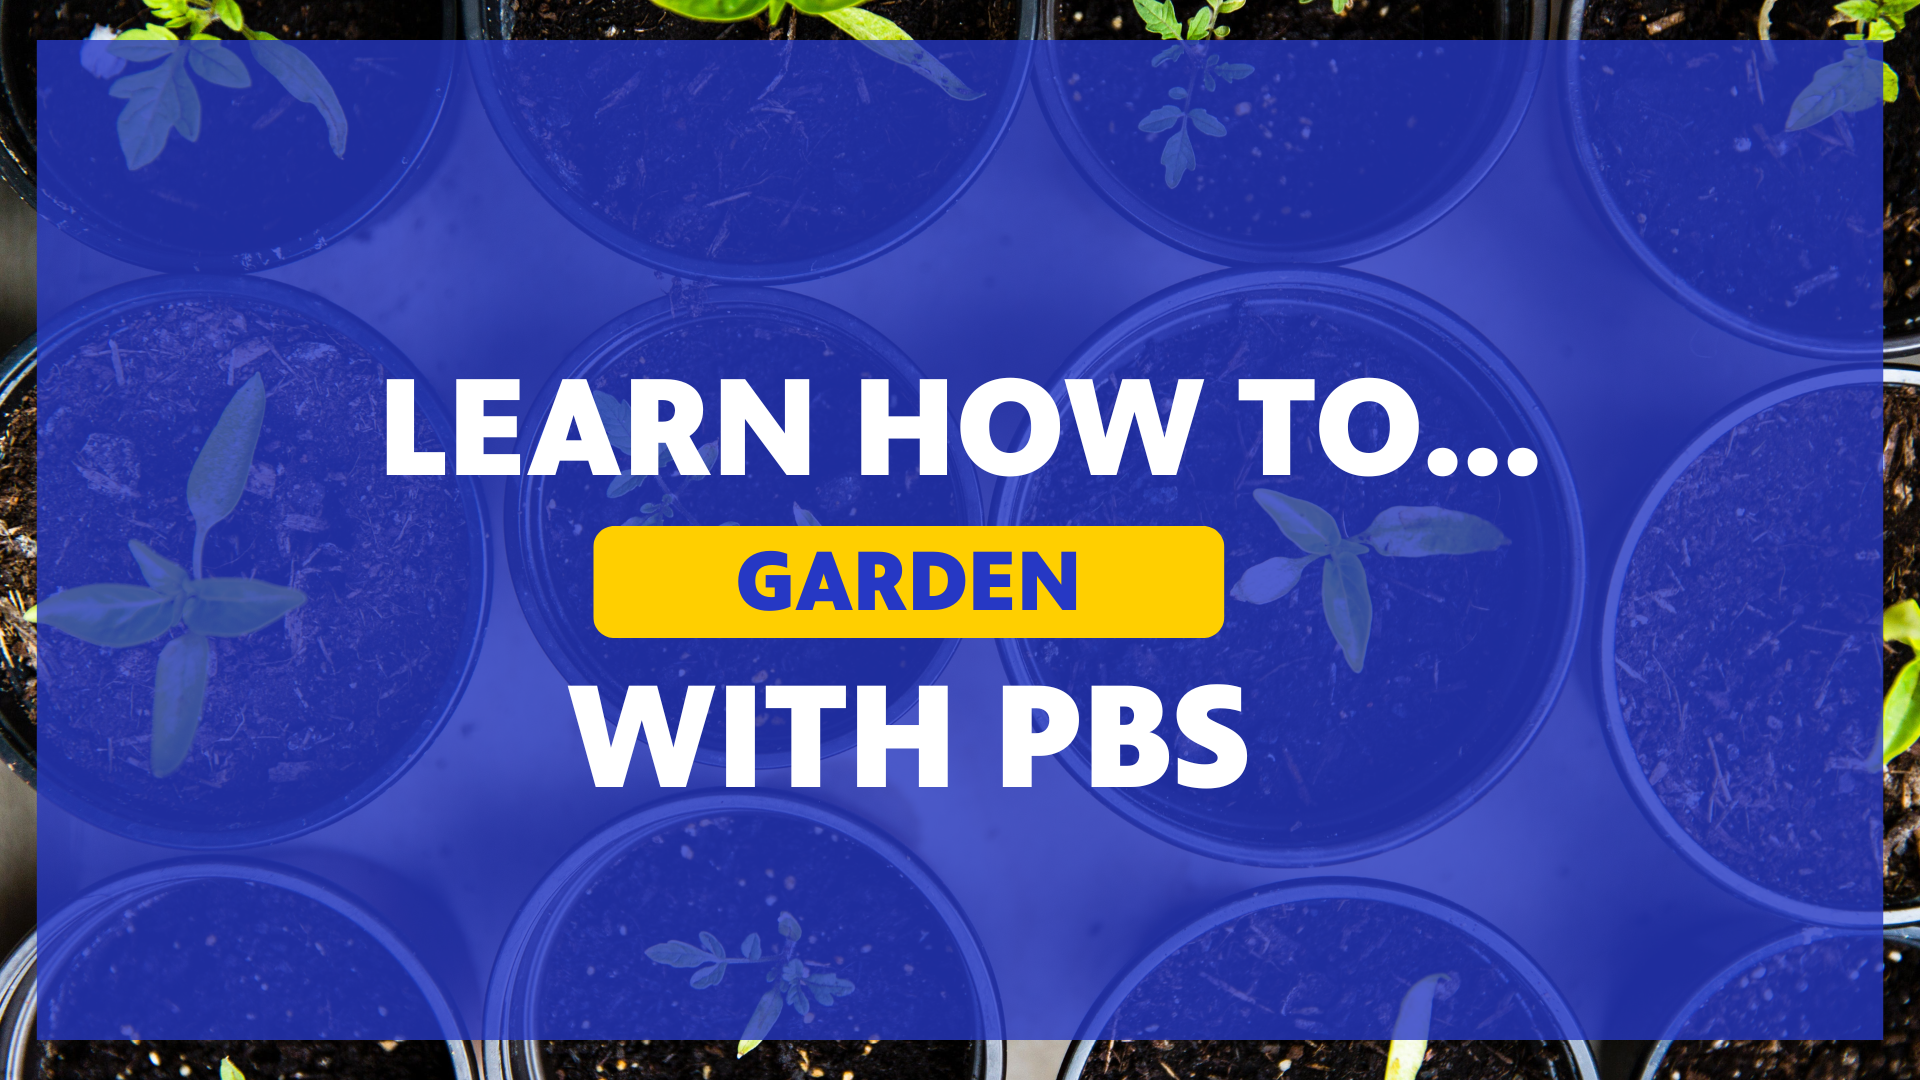 Learn How to Garden with PBS